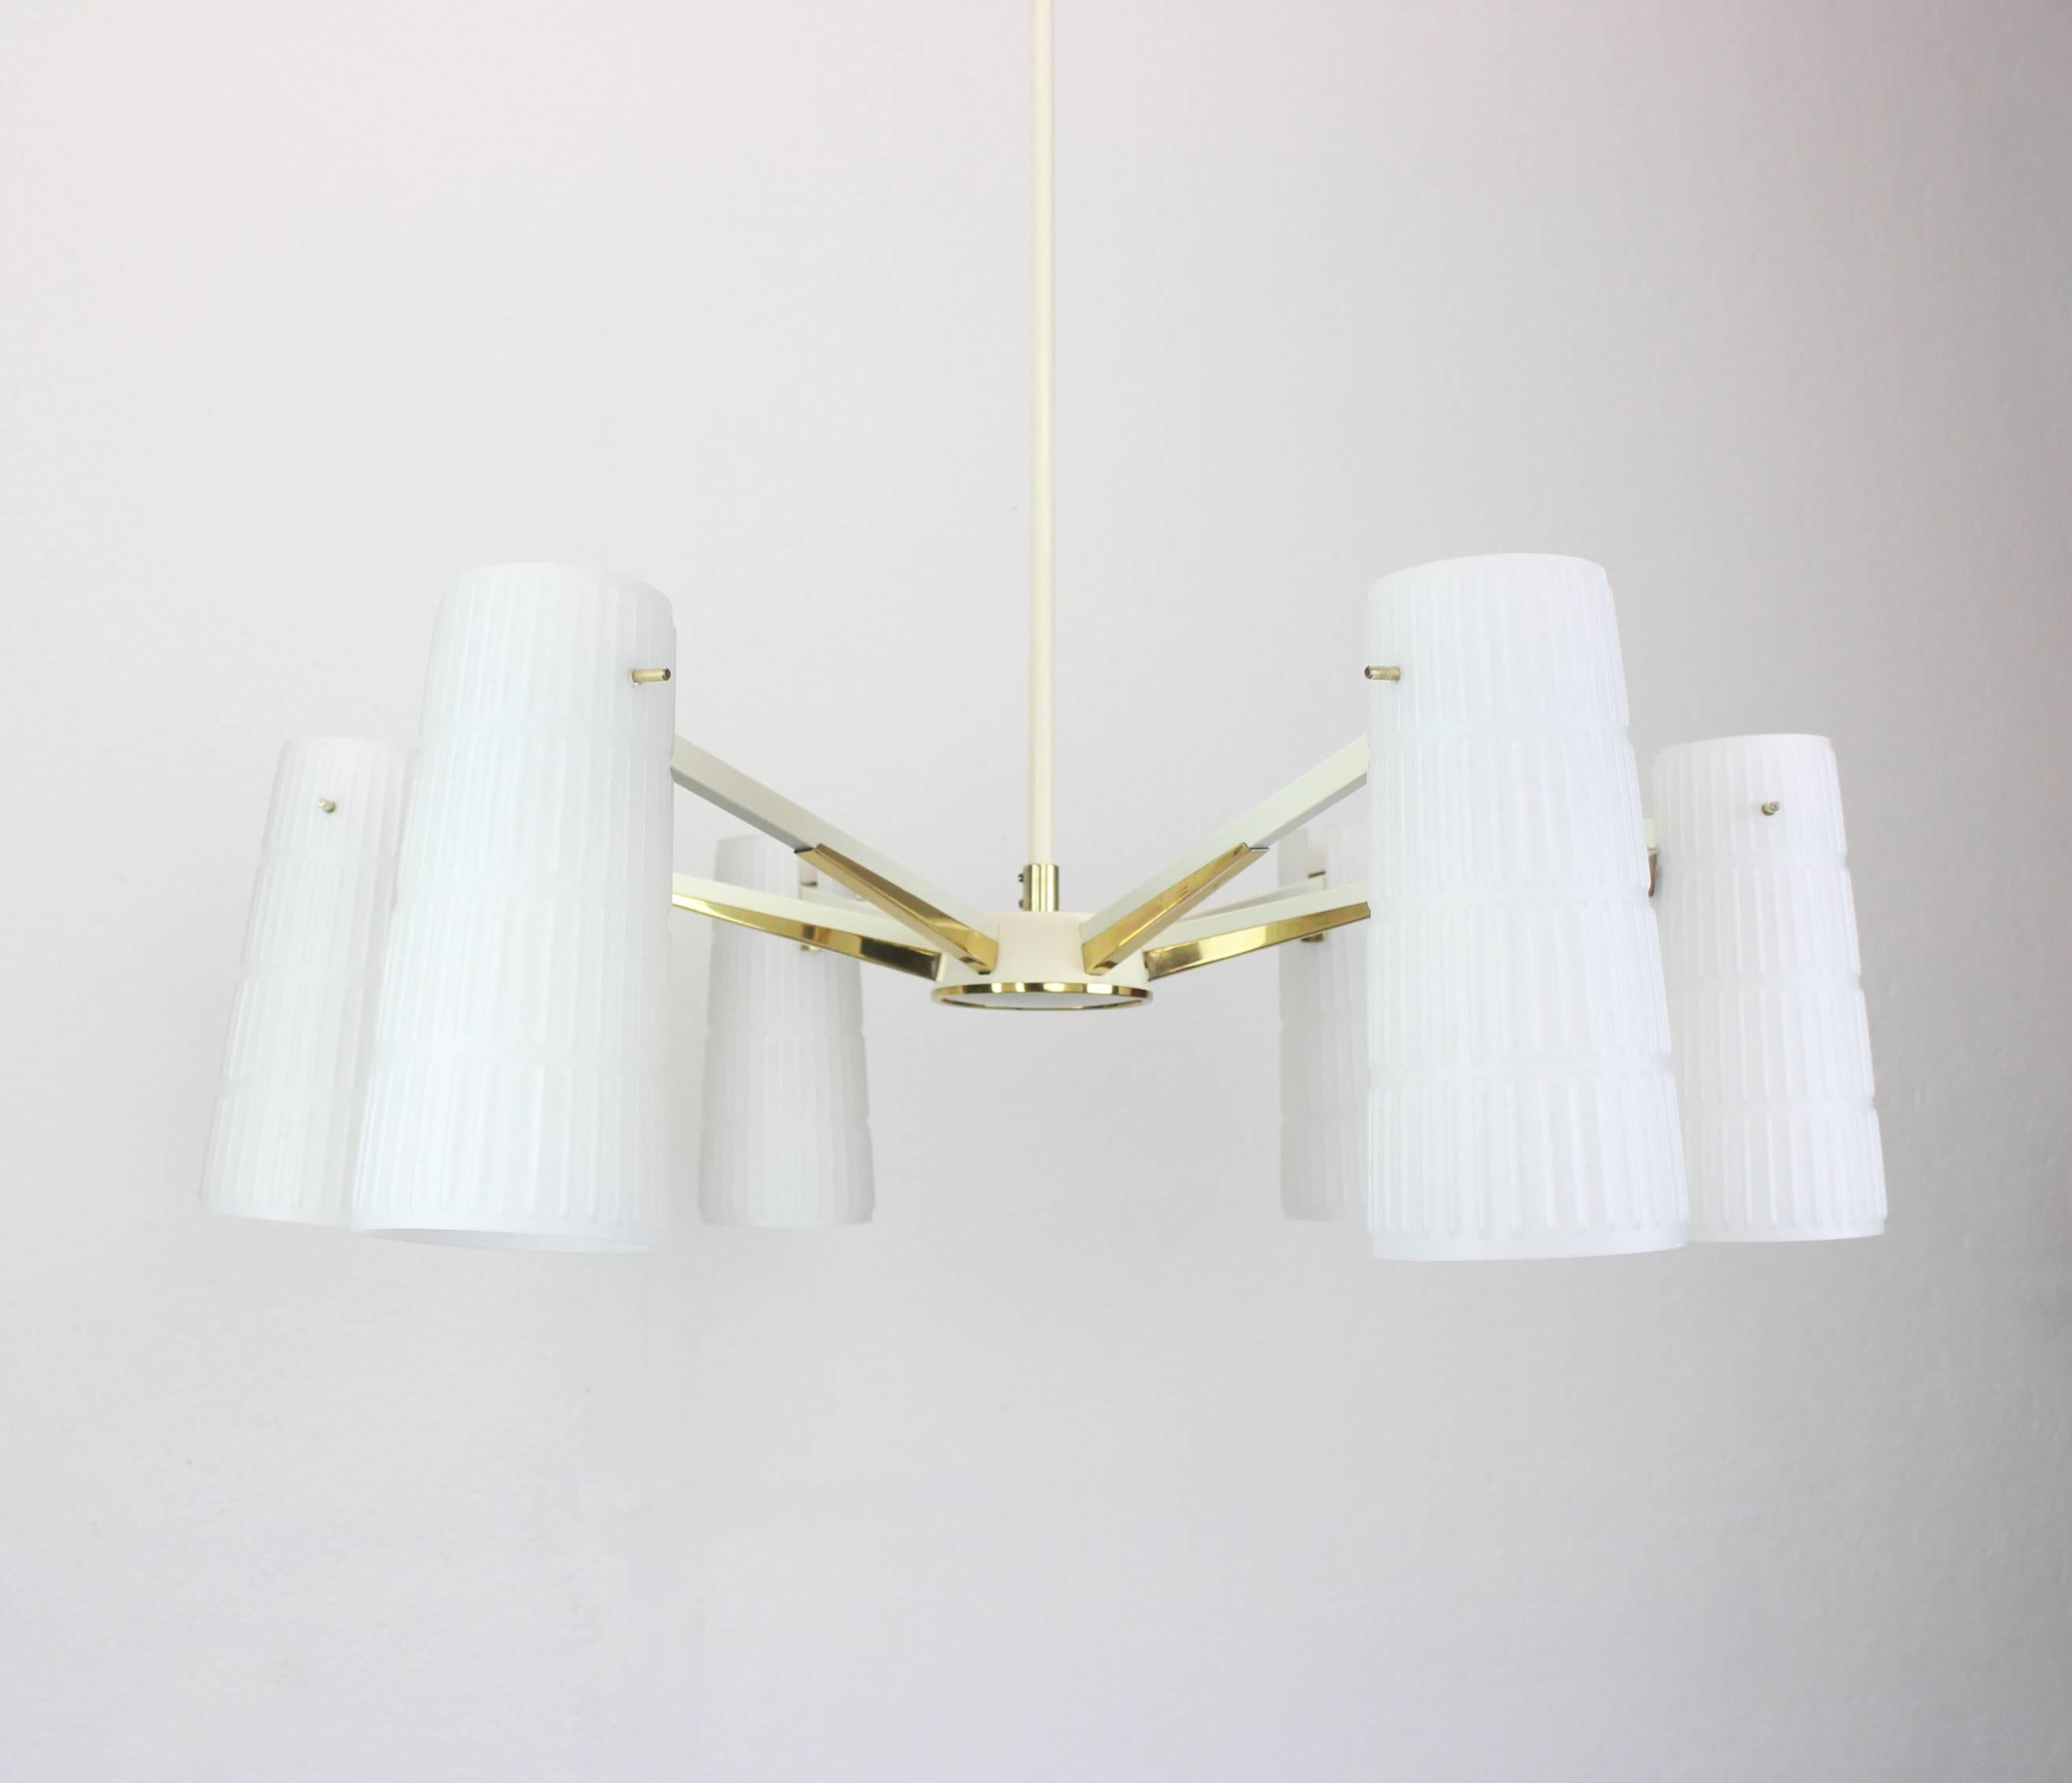 A stunning six-light chandelier in the manner of Stilnovo, Italy, manufactured in circa 1950-1959. A handmade and high quality piece.
High quality and in very good condition. Cleaned, well-wired and ready to use.

The fixture requires 6 x E14